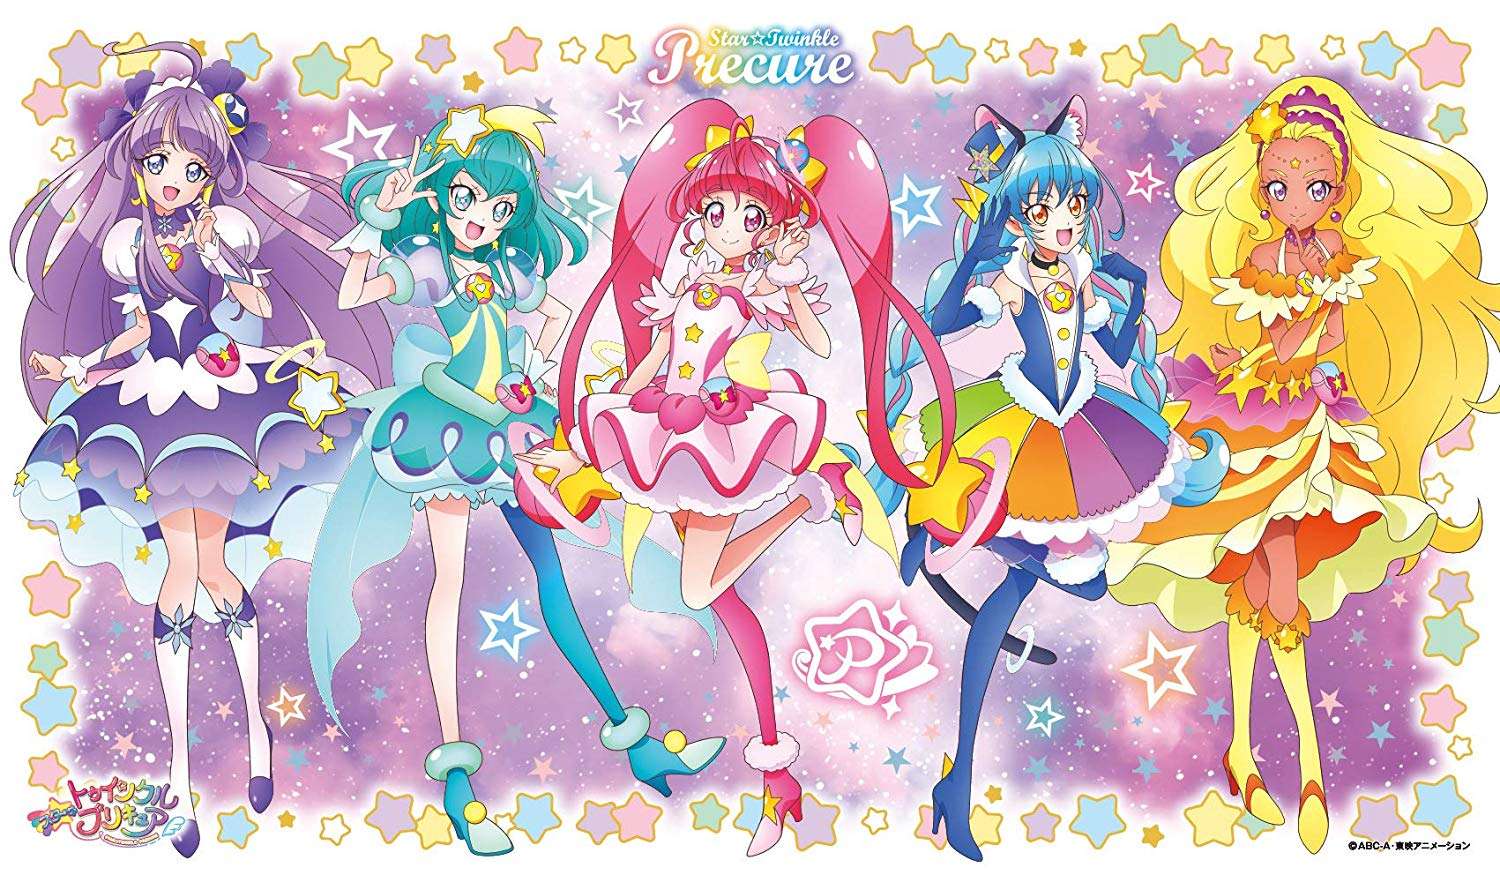 Star Twinkle Precure! online puzzle